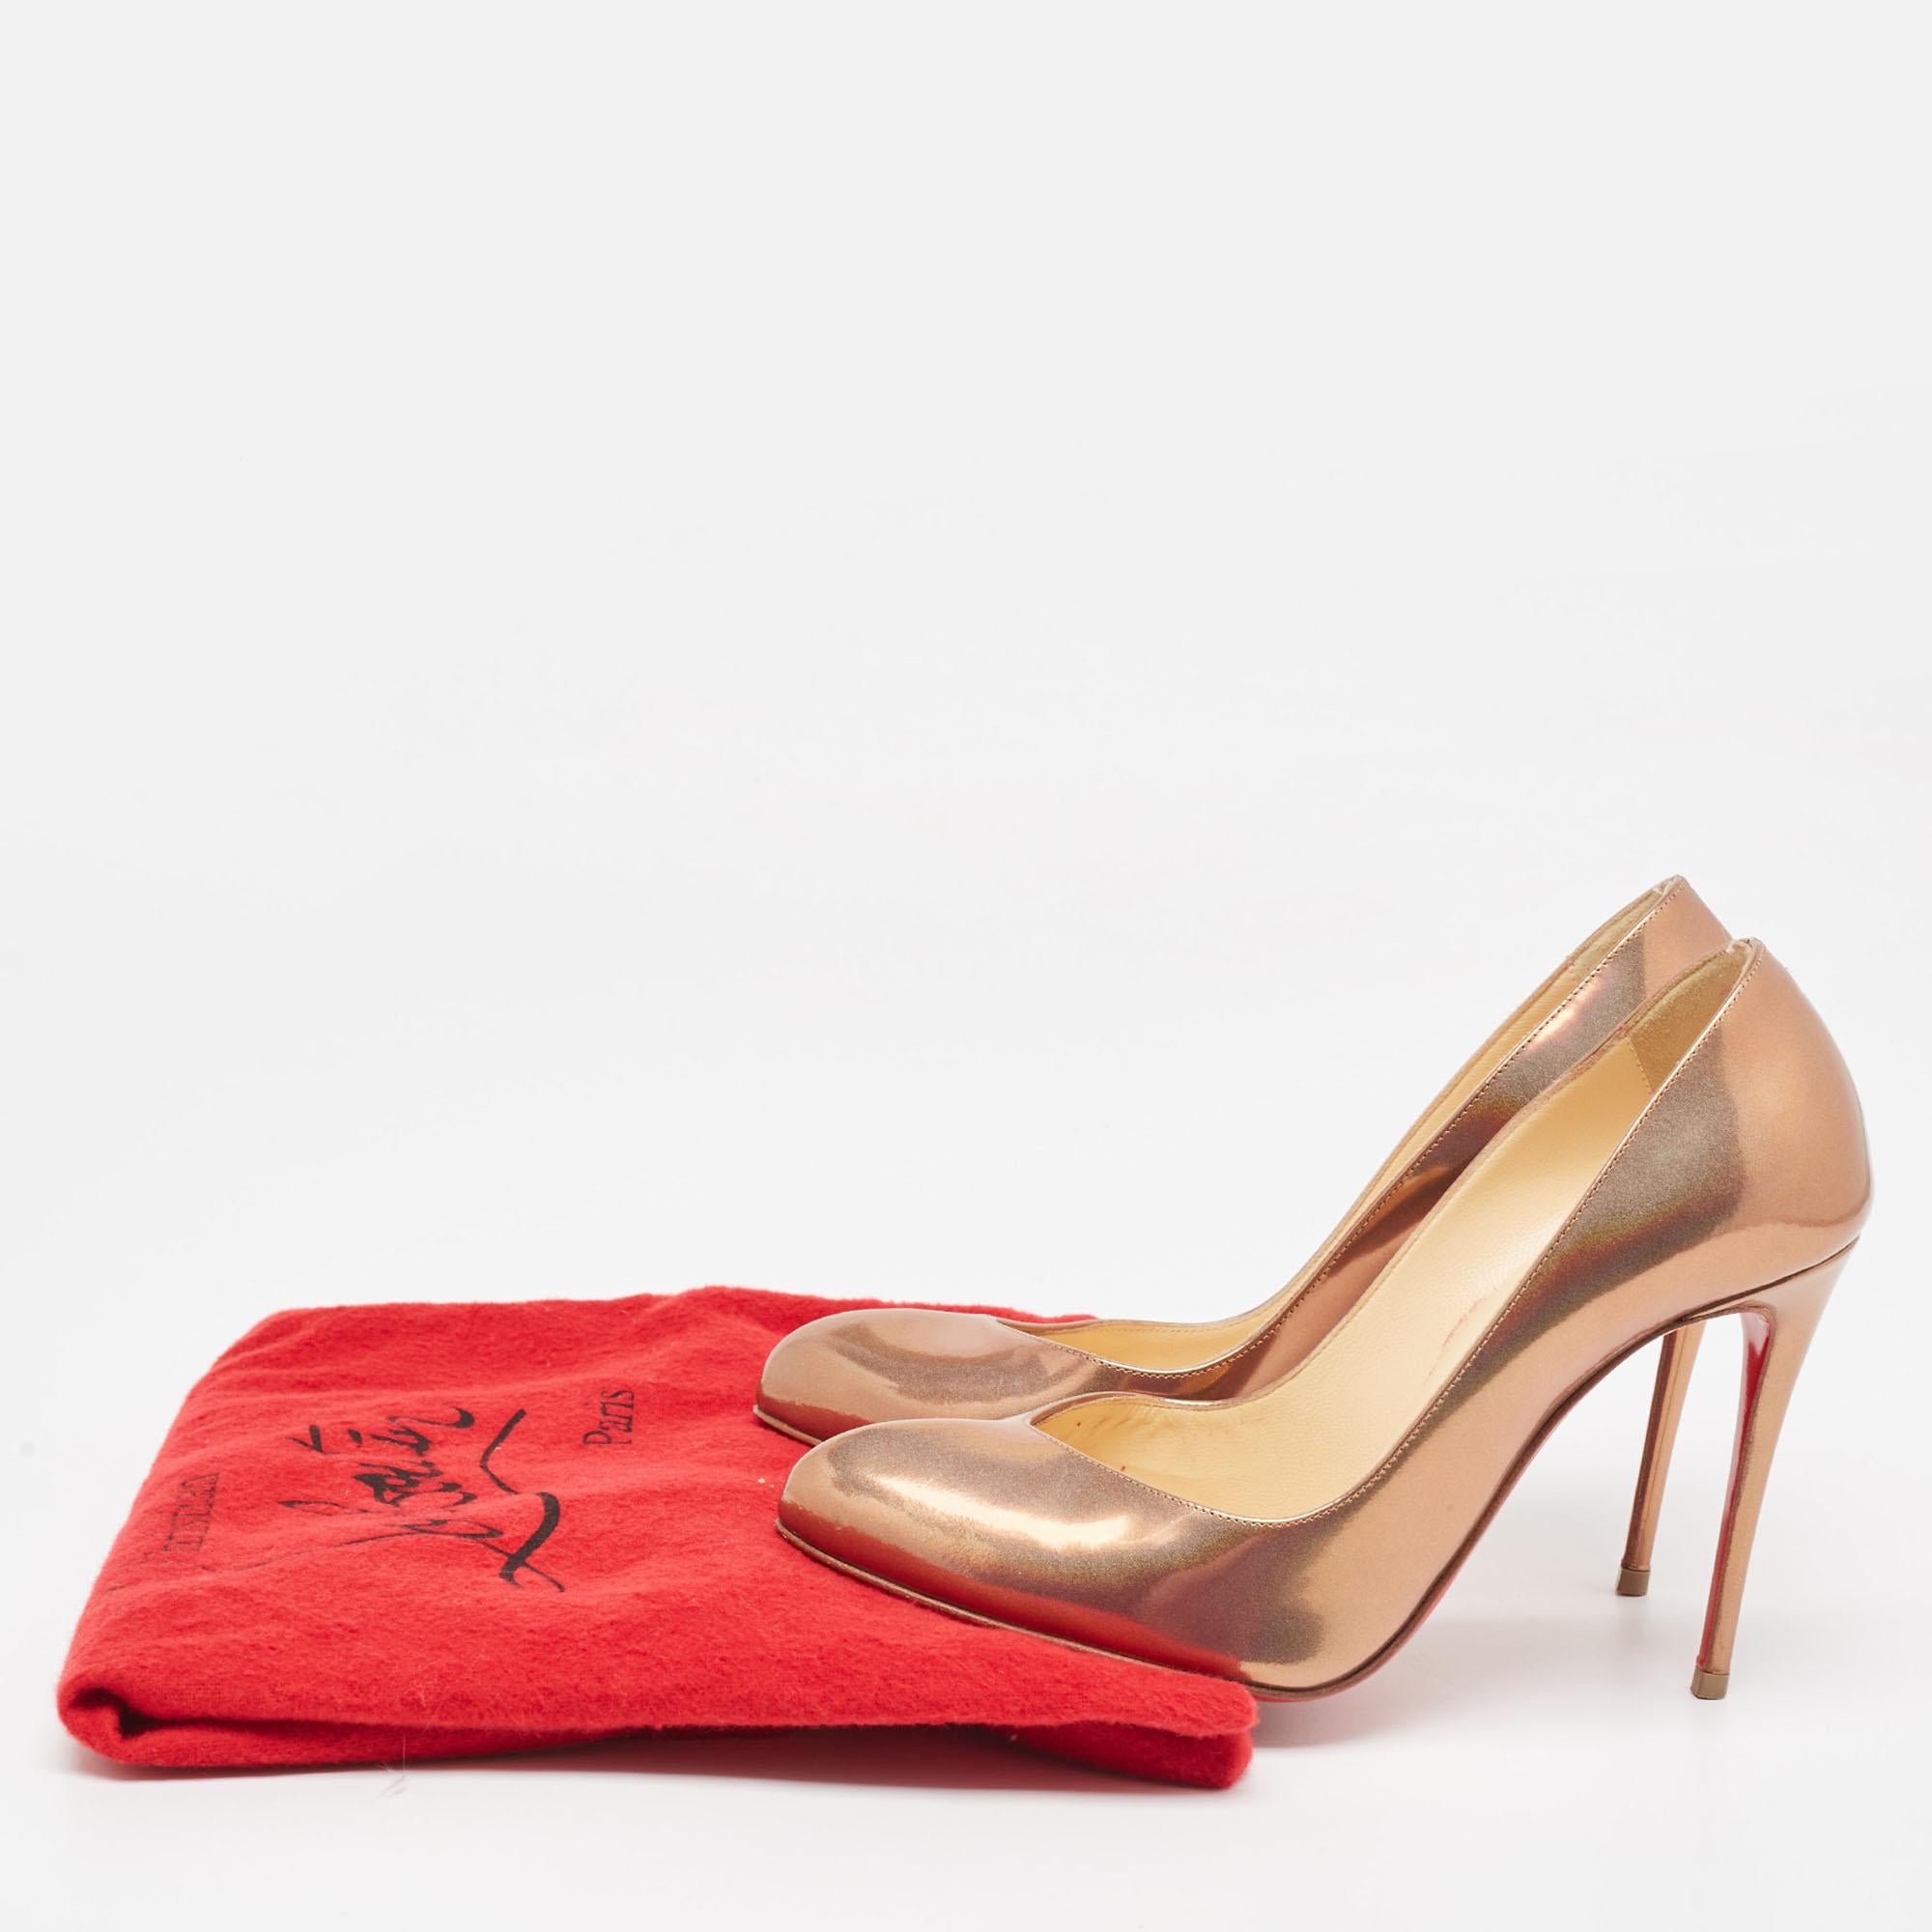 Christian Louboutin Metallic Brown Leather Breche Pumps Size 35.5 For Sale 5